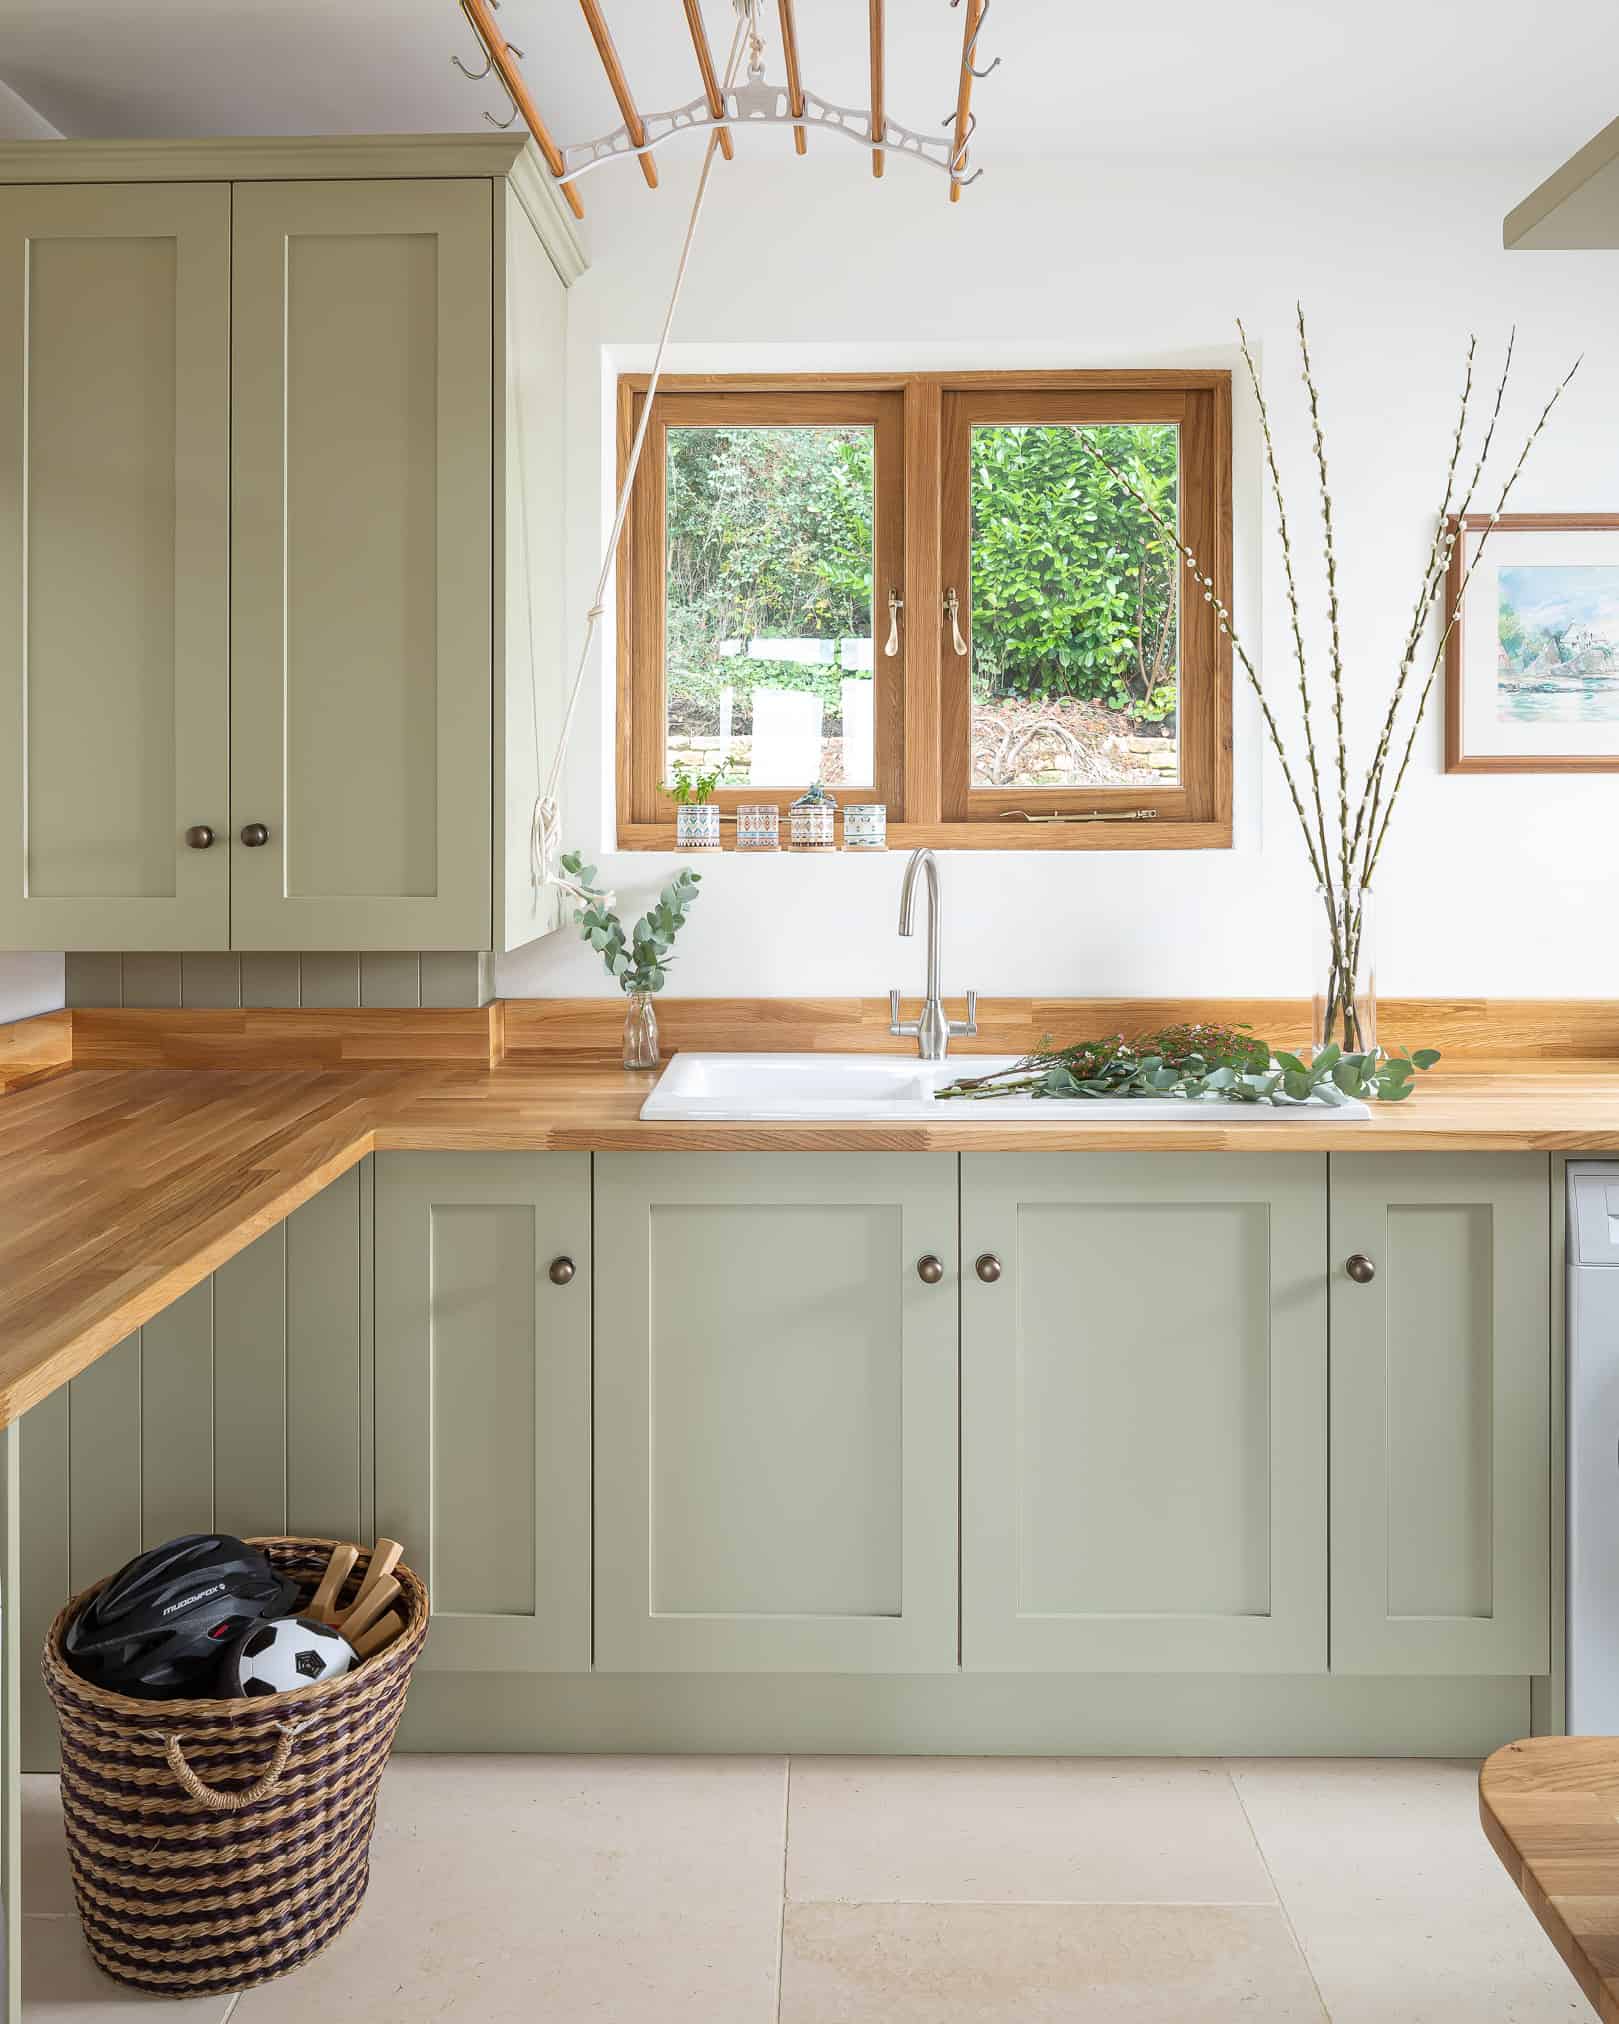 John Lewis of Hungerford luxury shaker kitchen in pale green cabinetry with wood worktops and kitchen window above a white sink